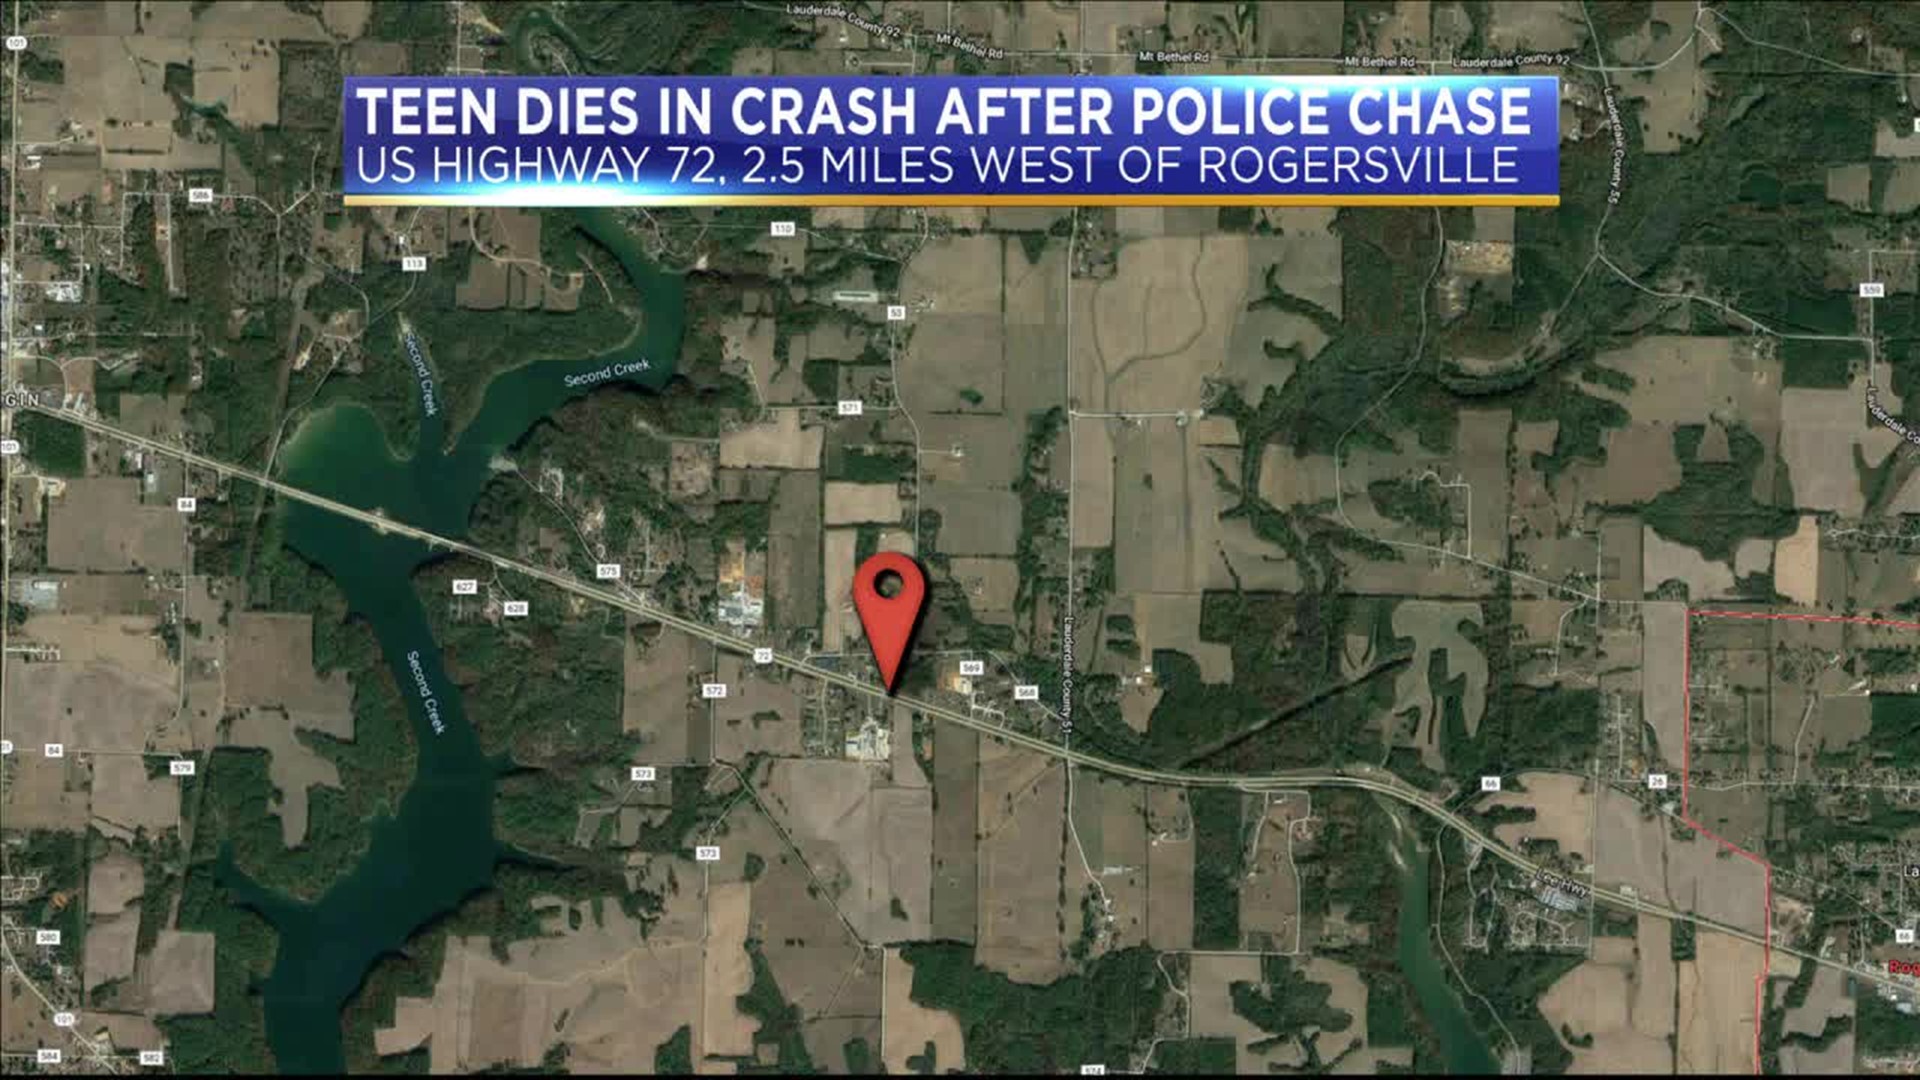 Alabama State Troopers say the teen, from Sheffield, was driving a stolen vehicle and was heading eastbound on us Highway 72. They were being pursued by multiple agencies. About 2.5 miles west of Rogersville, they say the vehicle suddenly swerved off the road and flipped multiple times.